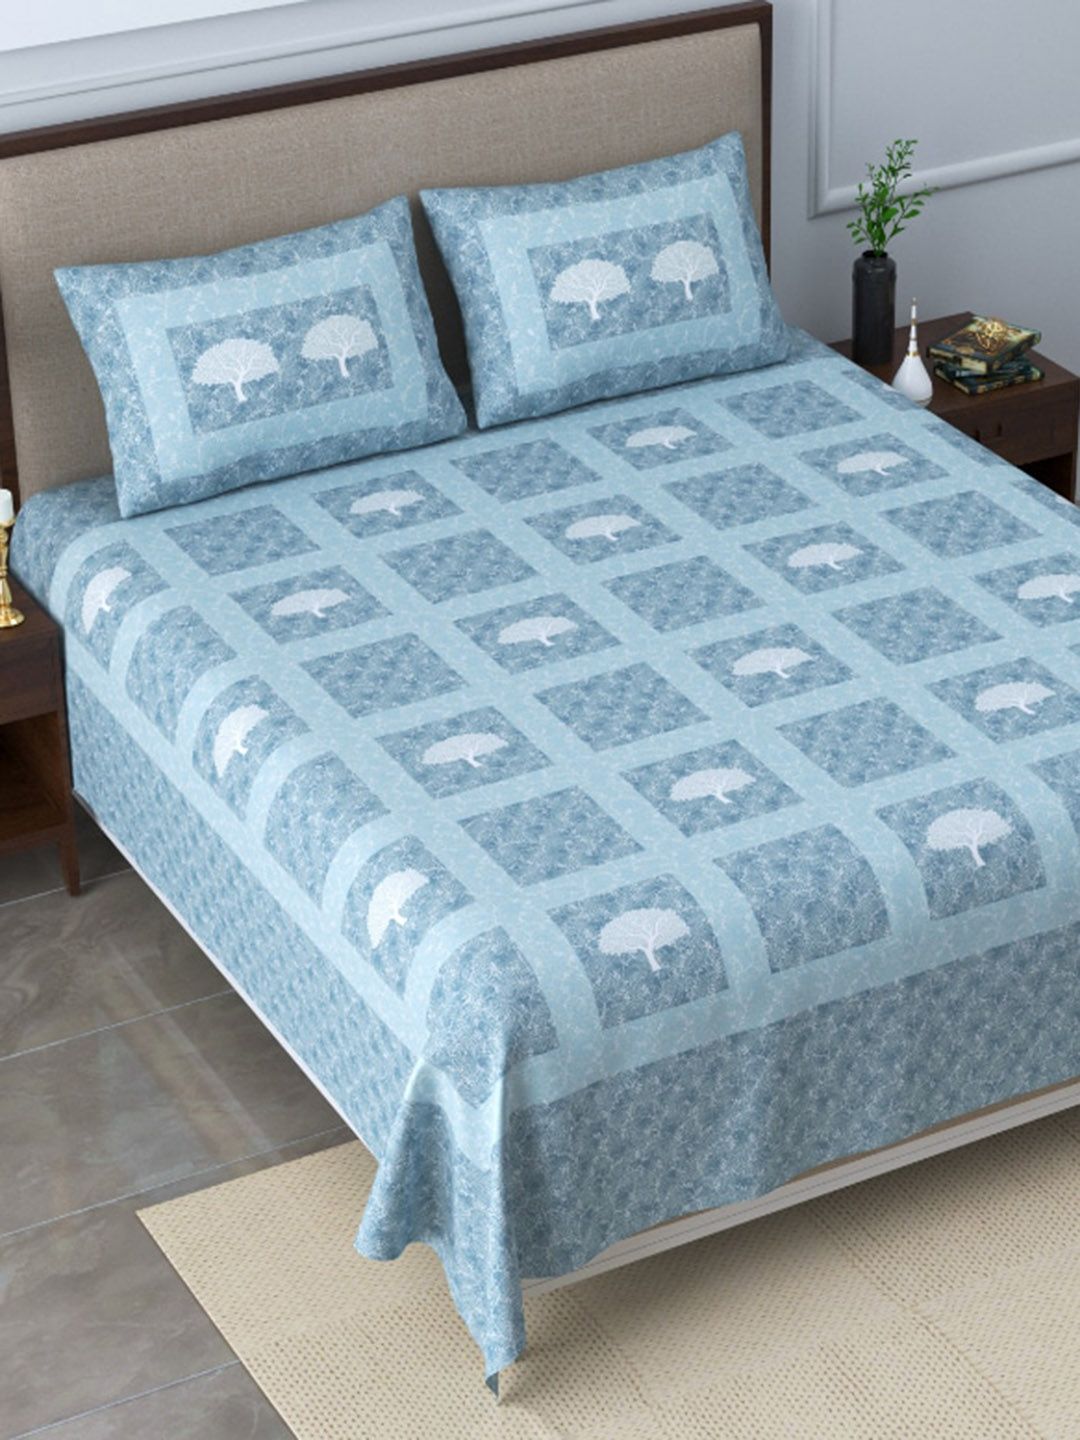 EasyGoods Ethnic Motifs 300 TC Cotton King Bedsheet with 2 Pillow Covers Price in India